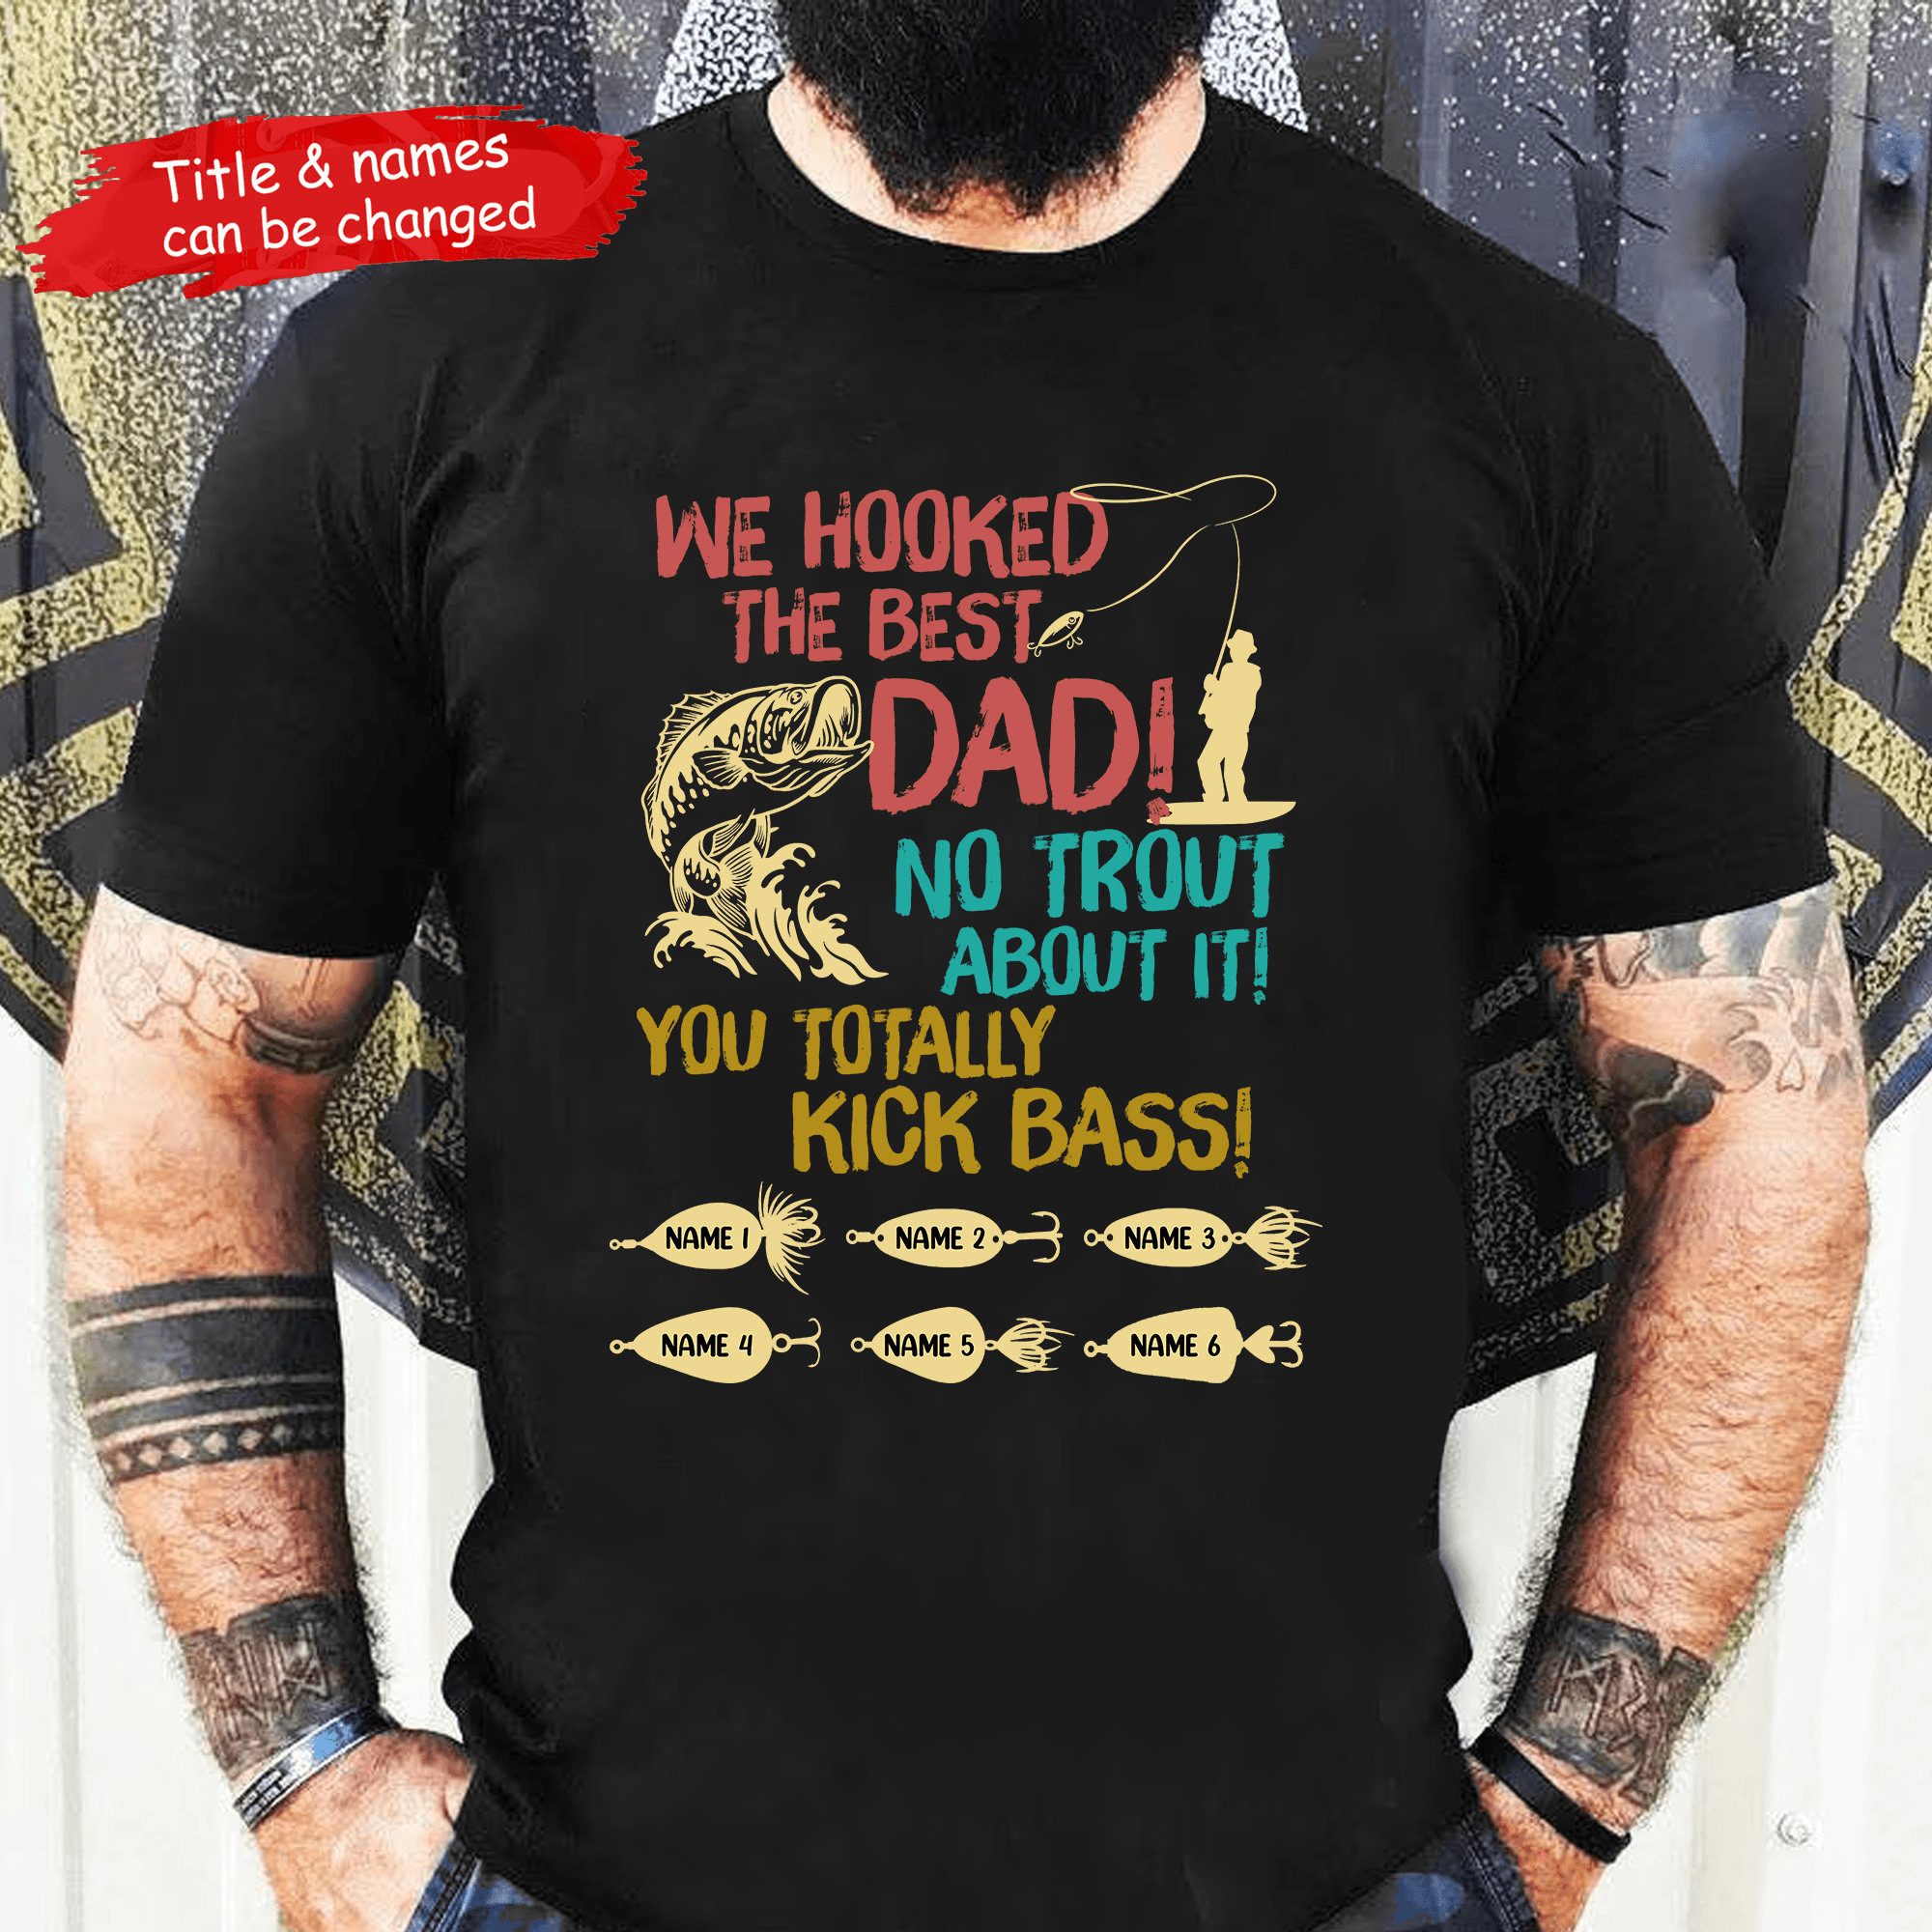 We Hooked The Best Dad, No Trout About It! - Personalized Custom Fishing T Shirt - Father's Day Funny Gift for Dad, Grandpa, Daddy, Dada, Husband, Dad Jokes, Reel Cool Dad - Suzitee Store